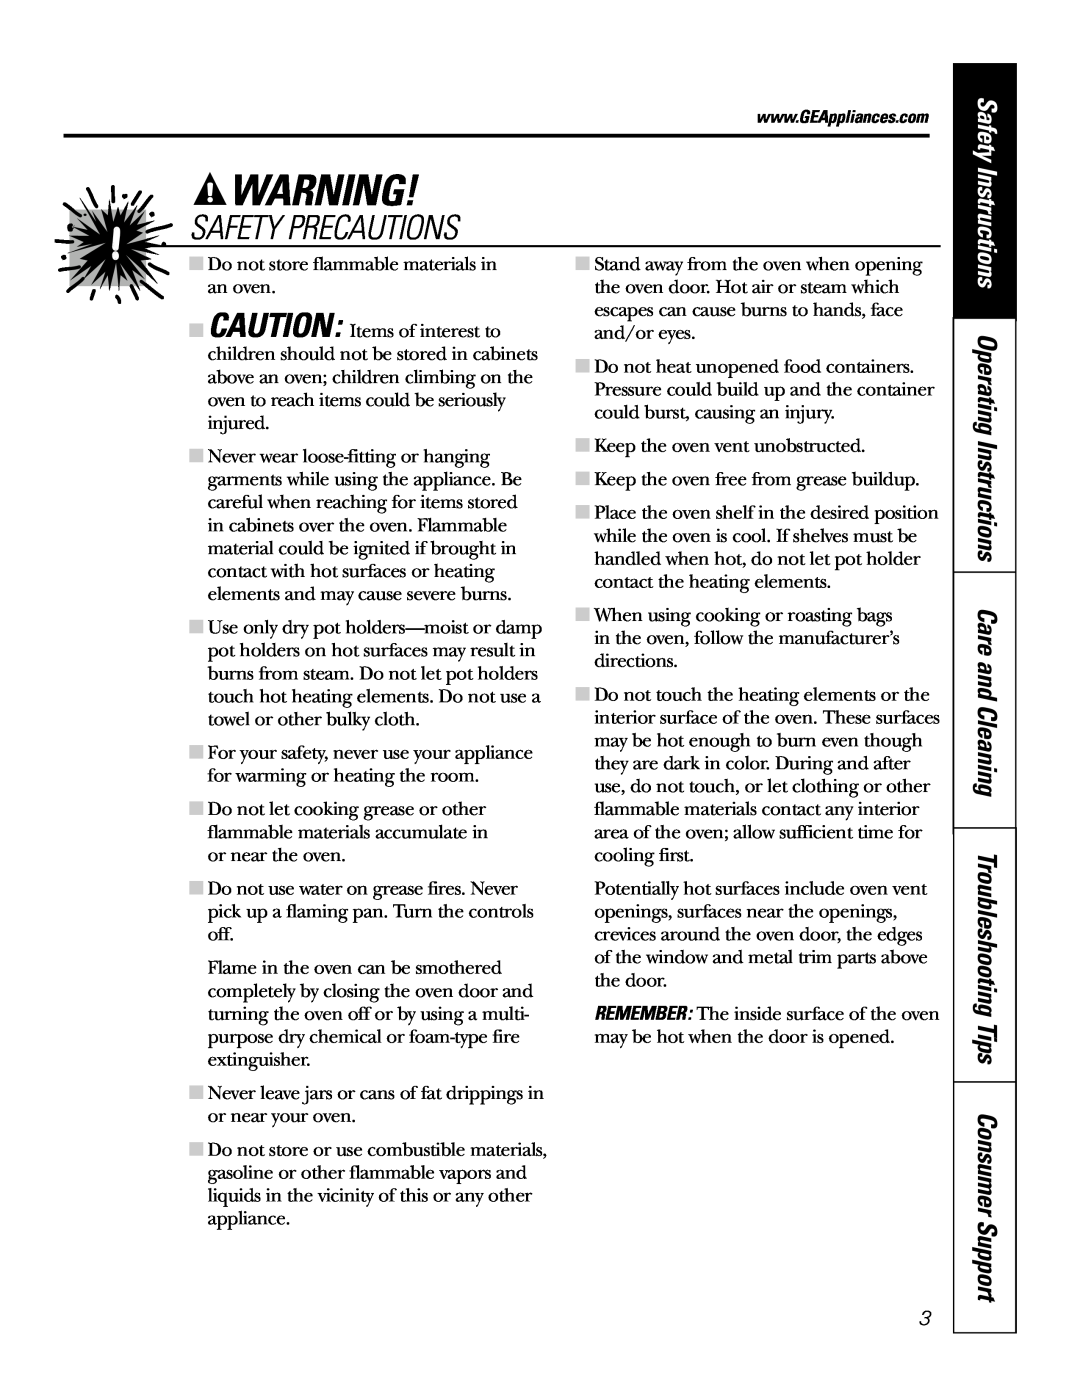 GE JKP2027 owner manual Safety Precautions, Do not store flammable materials in an oven 